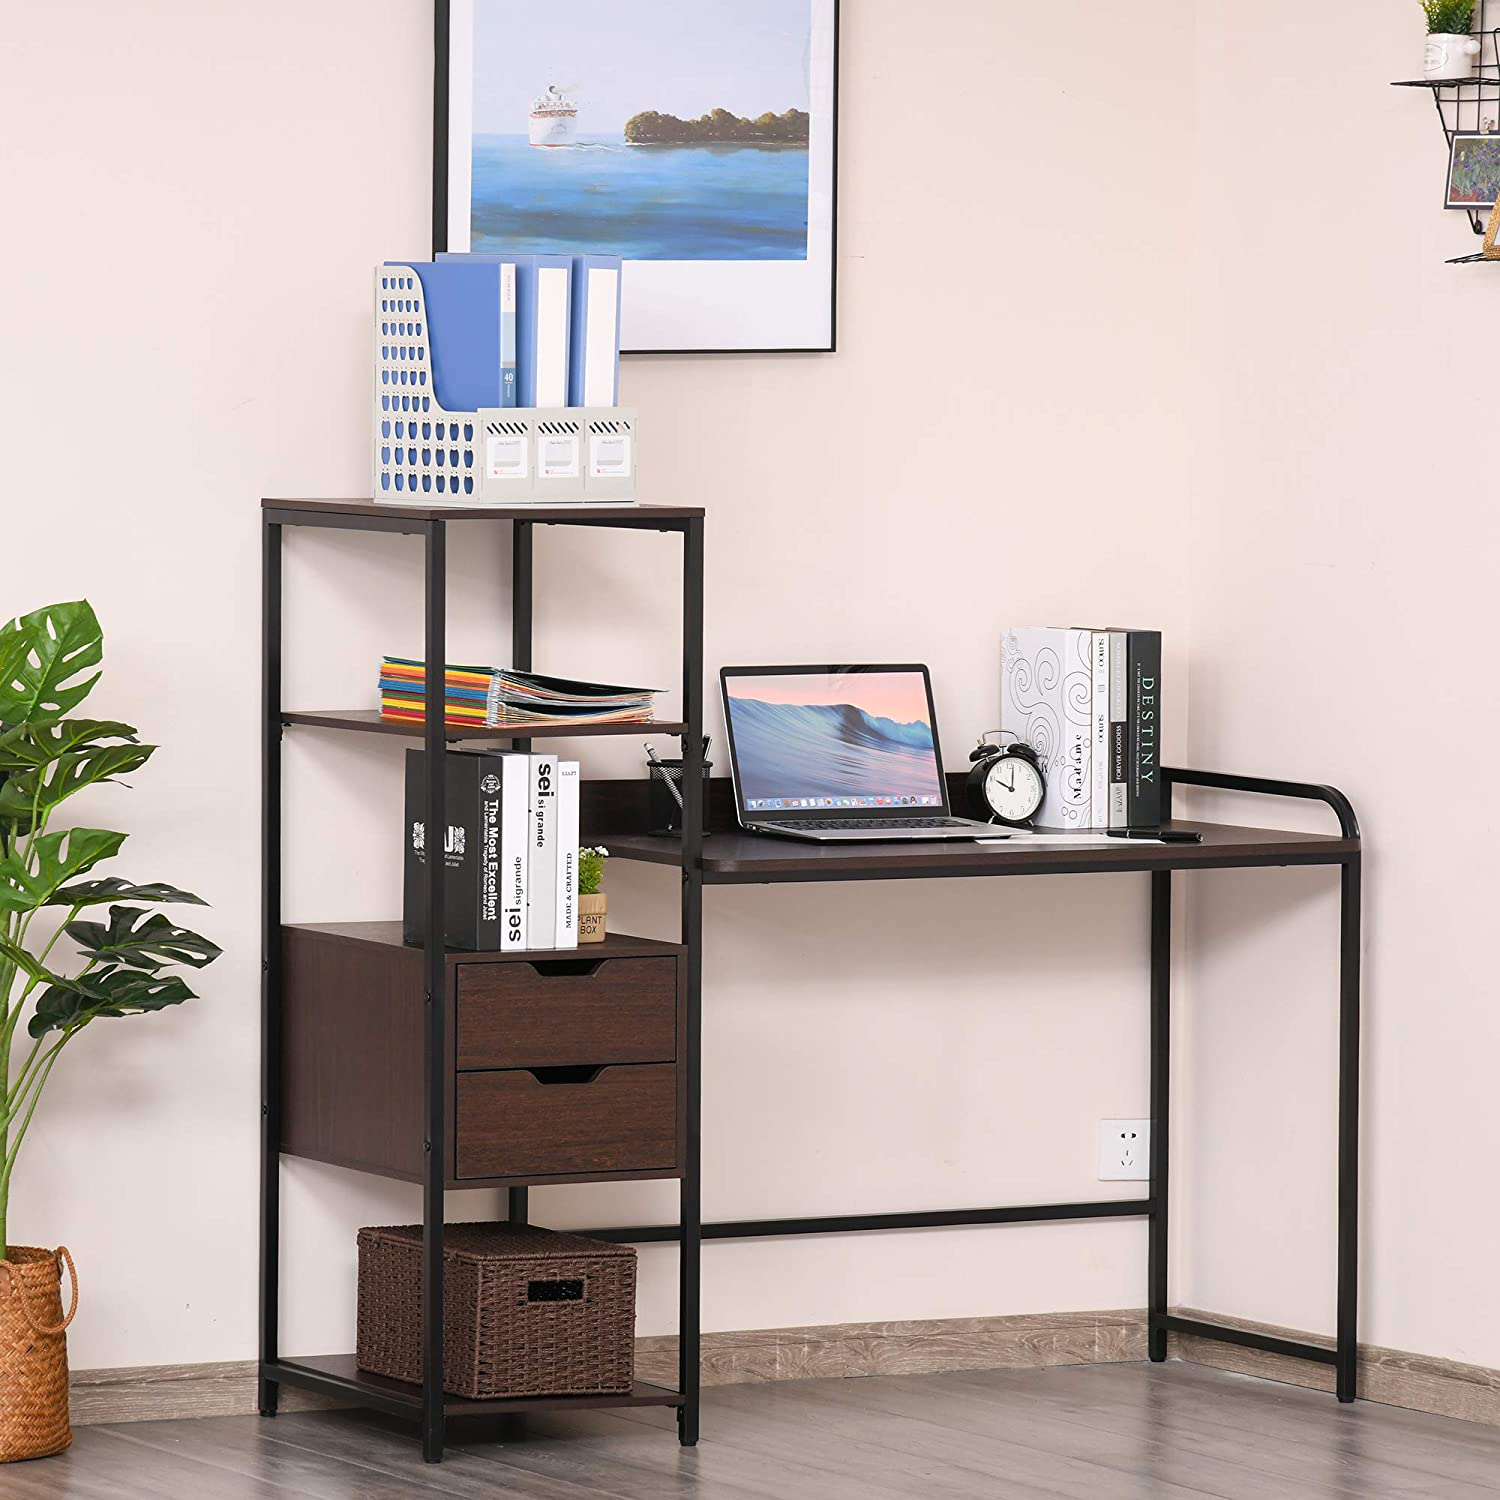 Coco Computer Desk Writing Table Workstation for Home Office with Shelves, Drawers, Walnut Brown